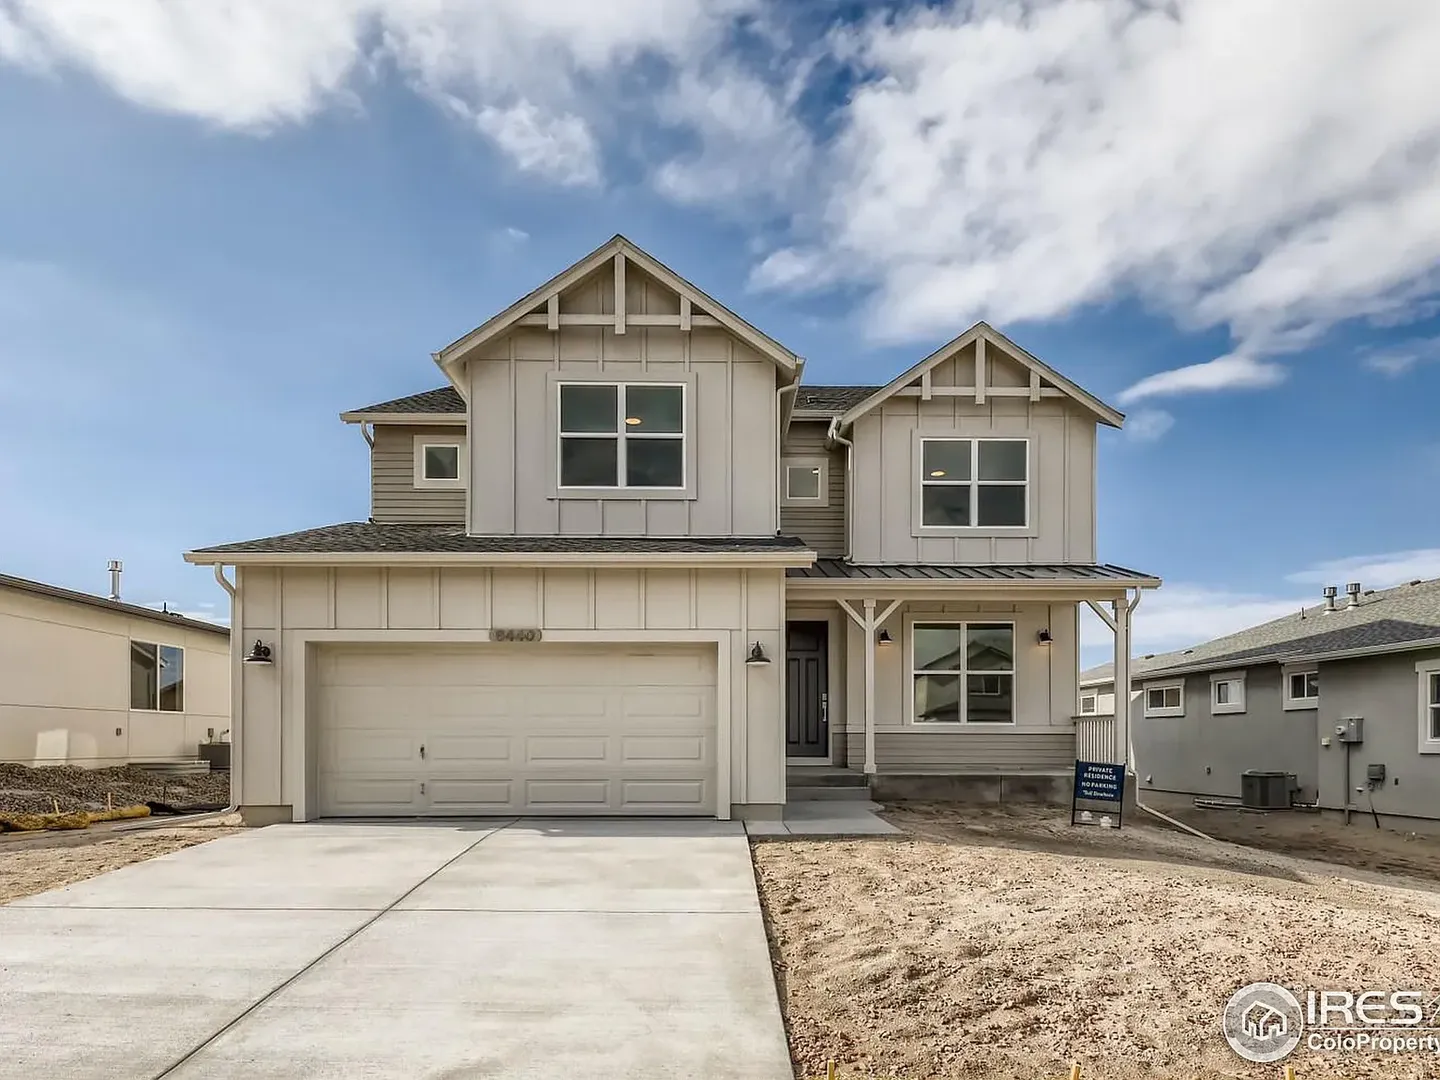 Houses Near UCCS stunning two-story home with open-concept great room boasts floor-to-ceiling windows designed to maximize natural light and scenery for University of Colorado at Colorado Springs Students in Colorado Springs, CO